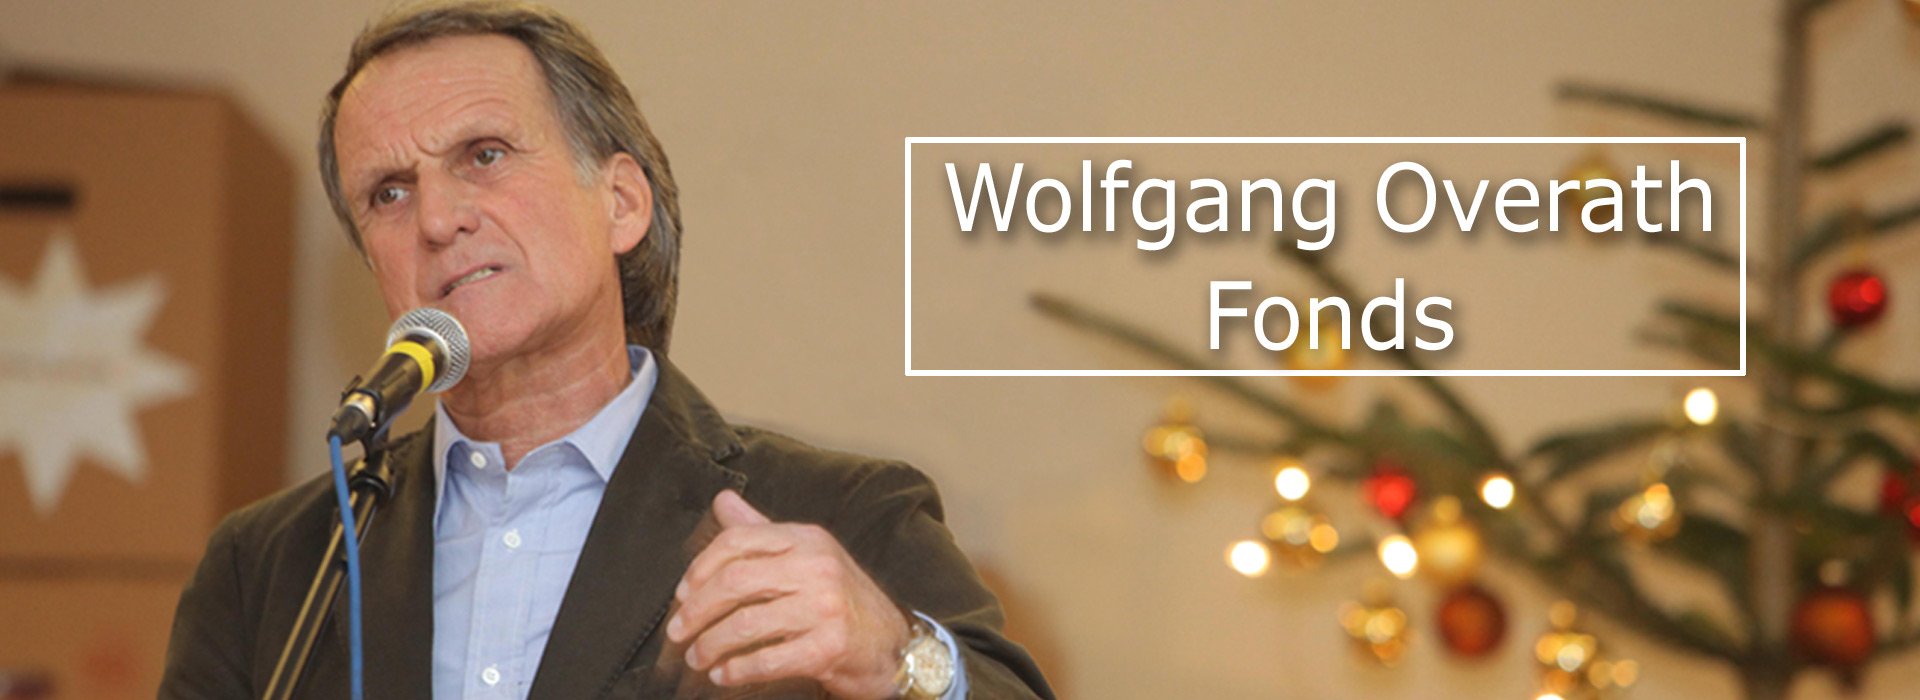 Wolfgang Overath Fonds